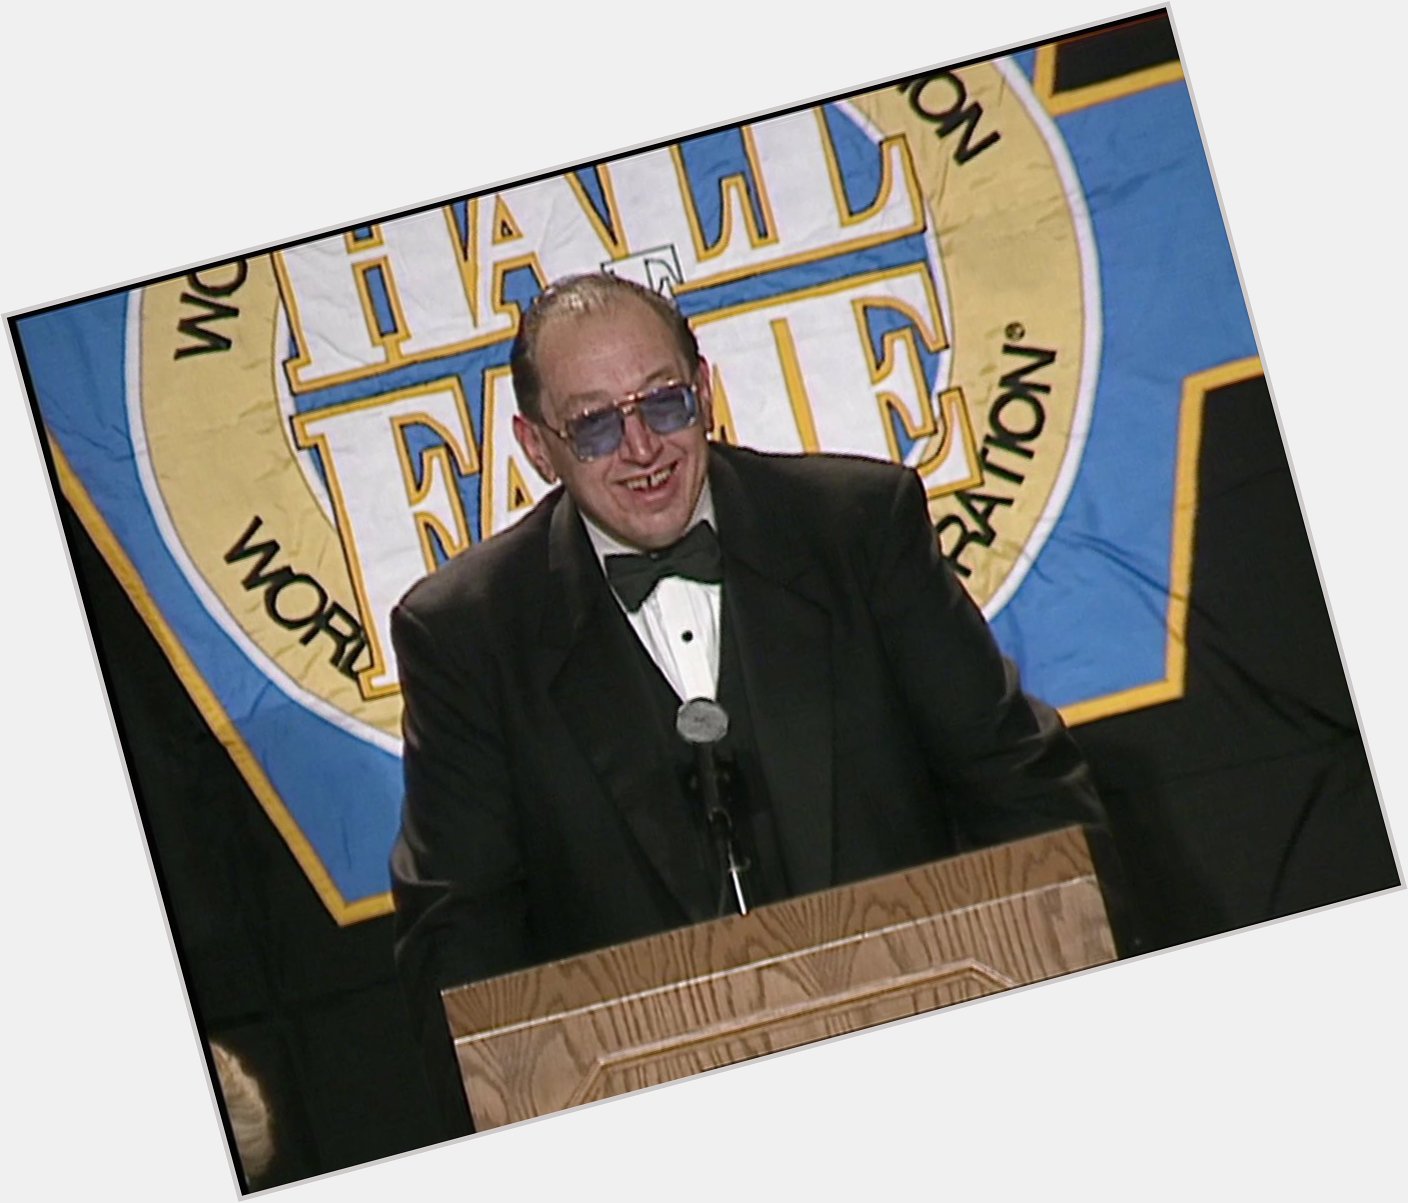 Happy Heavenly Birthday to the one and only, Gorilla Monsoon! 